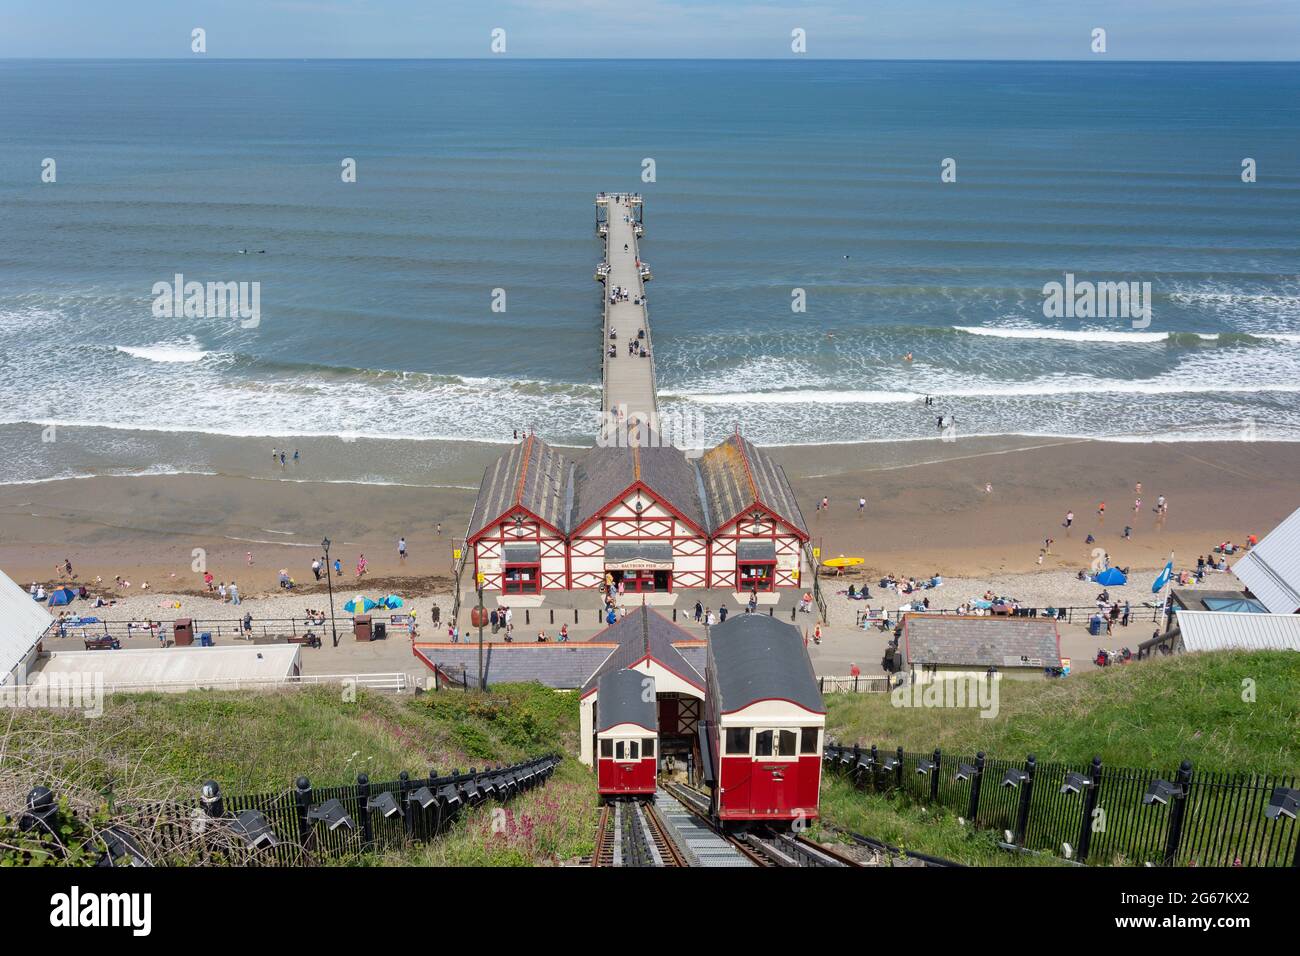 Saltburn Cliff Lift and Pier from Upper Station, Saltburn-by-the-Sea, North Yorkshire, England, United Kingdom Stock Photo